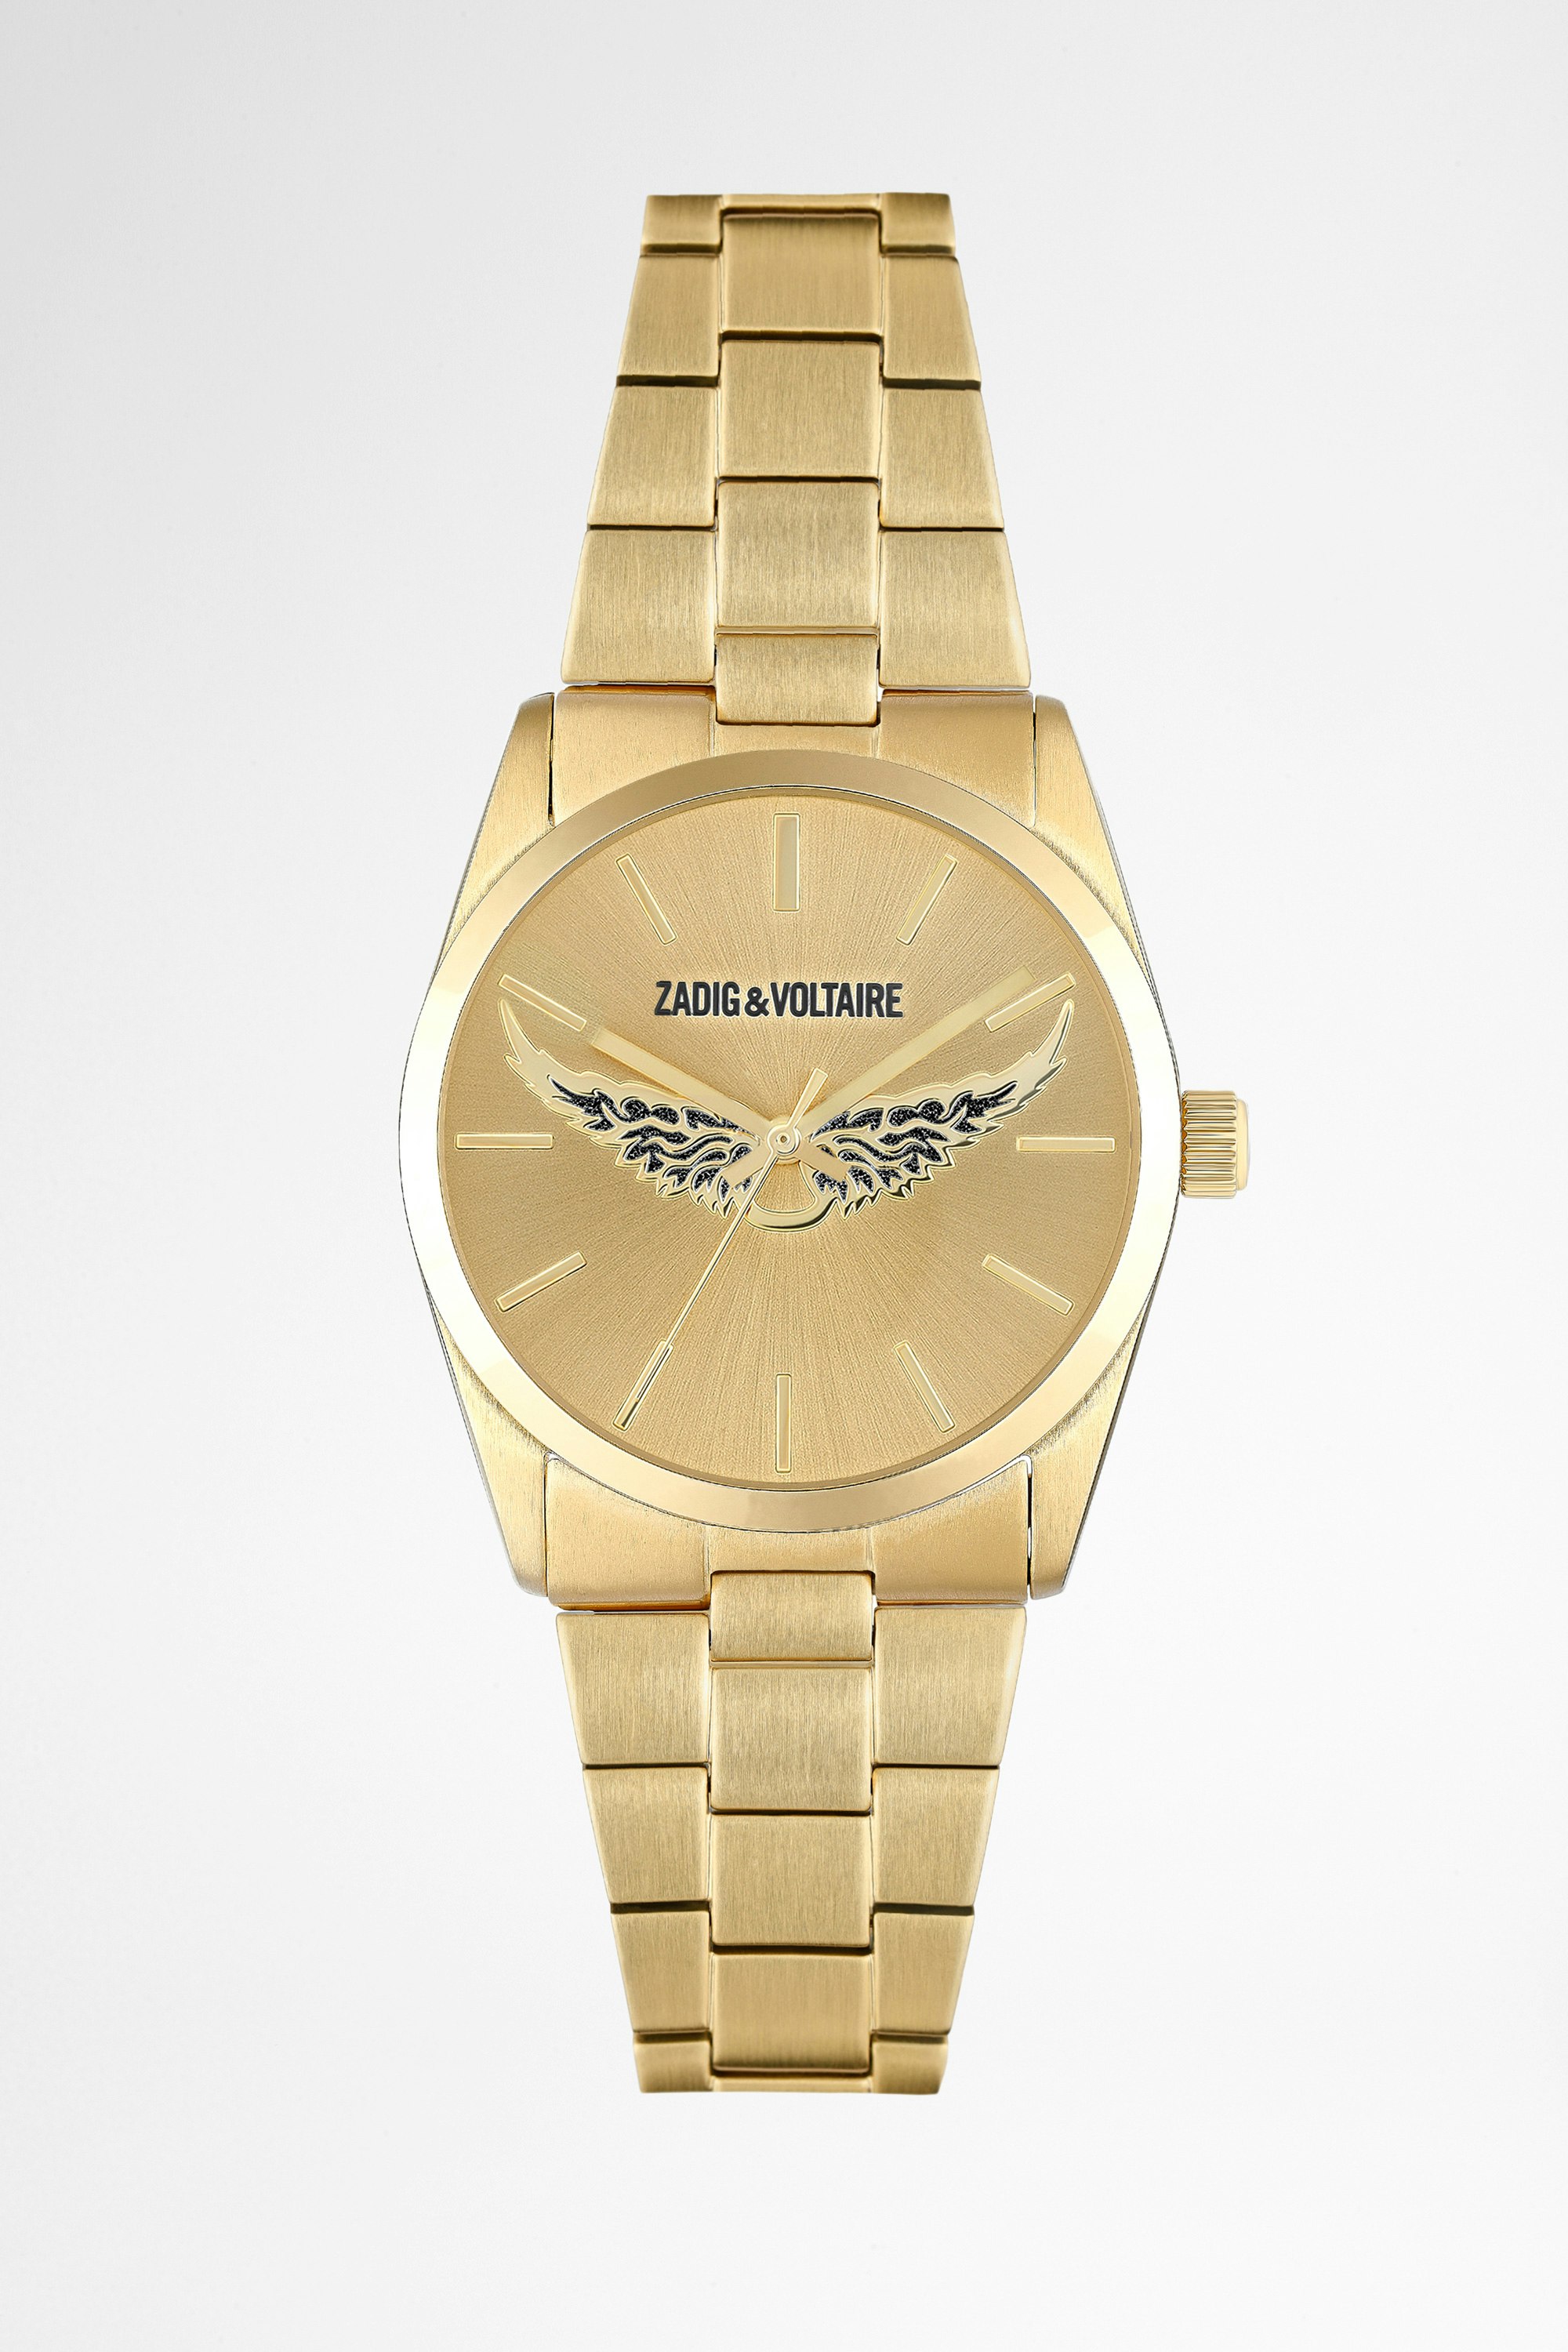 Fusion Gold Wings Watch Women's steel watch in gold with wings